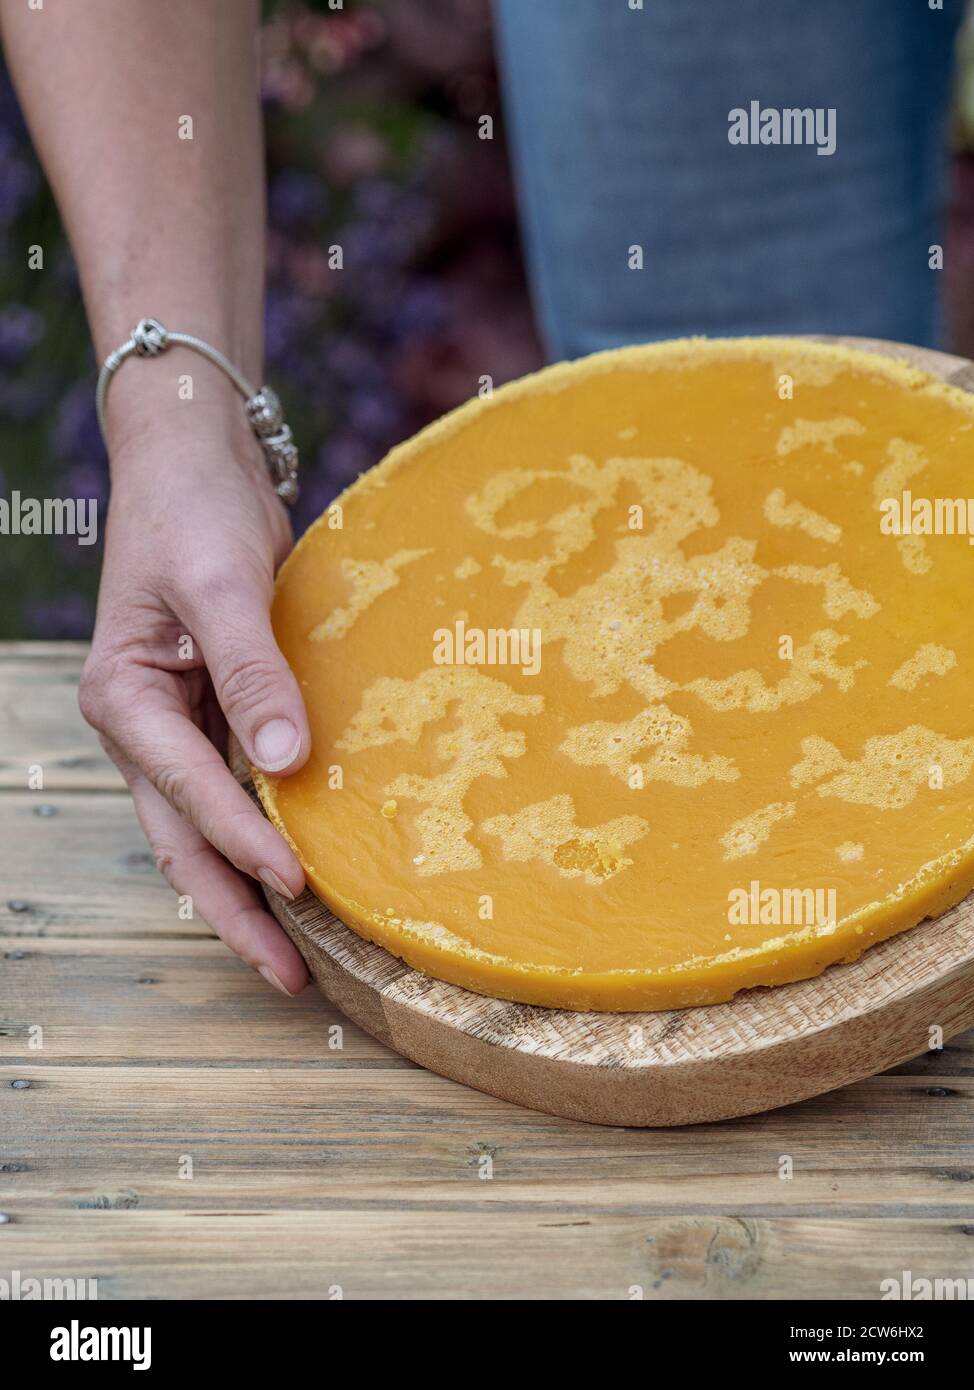 Woman holding yellow rounded piece of melted beeswax on wooden table. Copy space Stock Photo